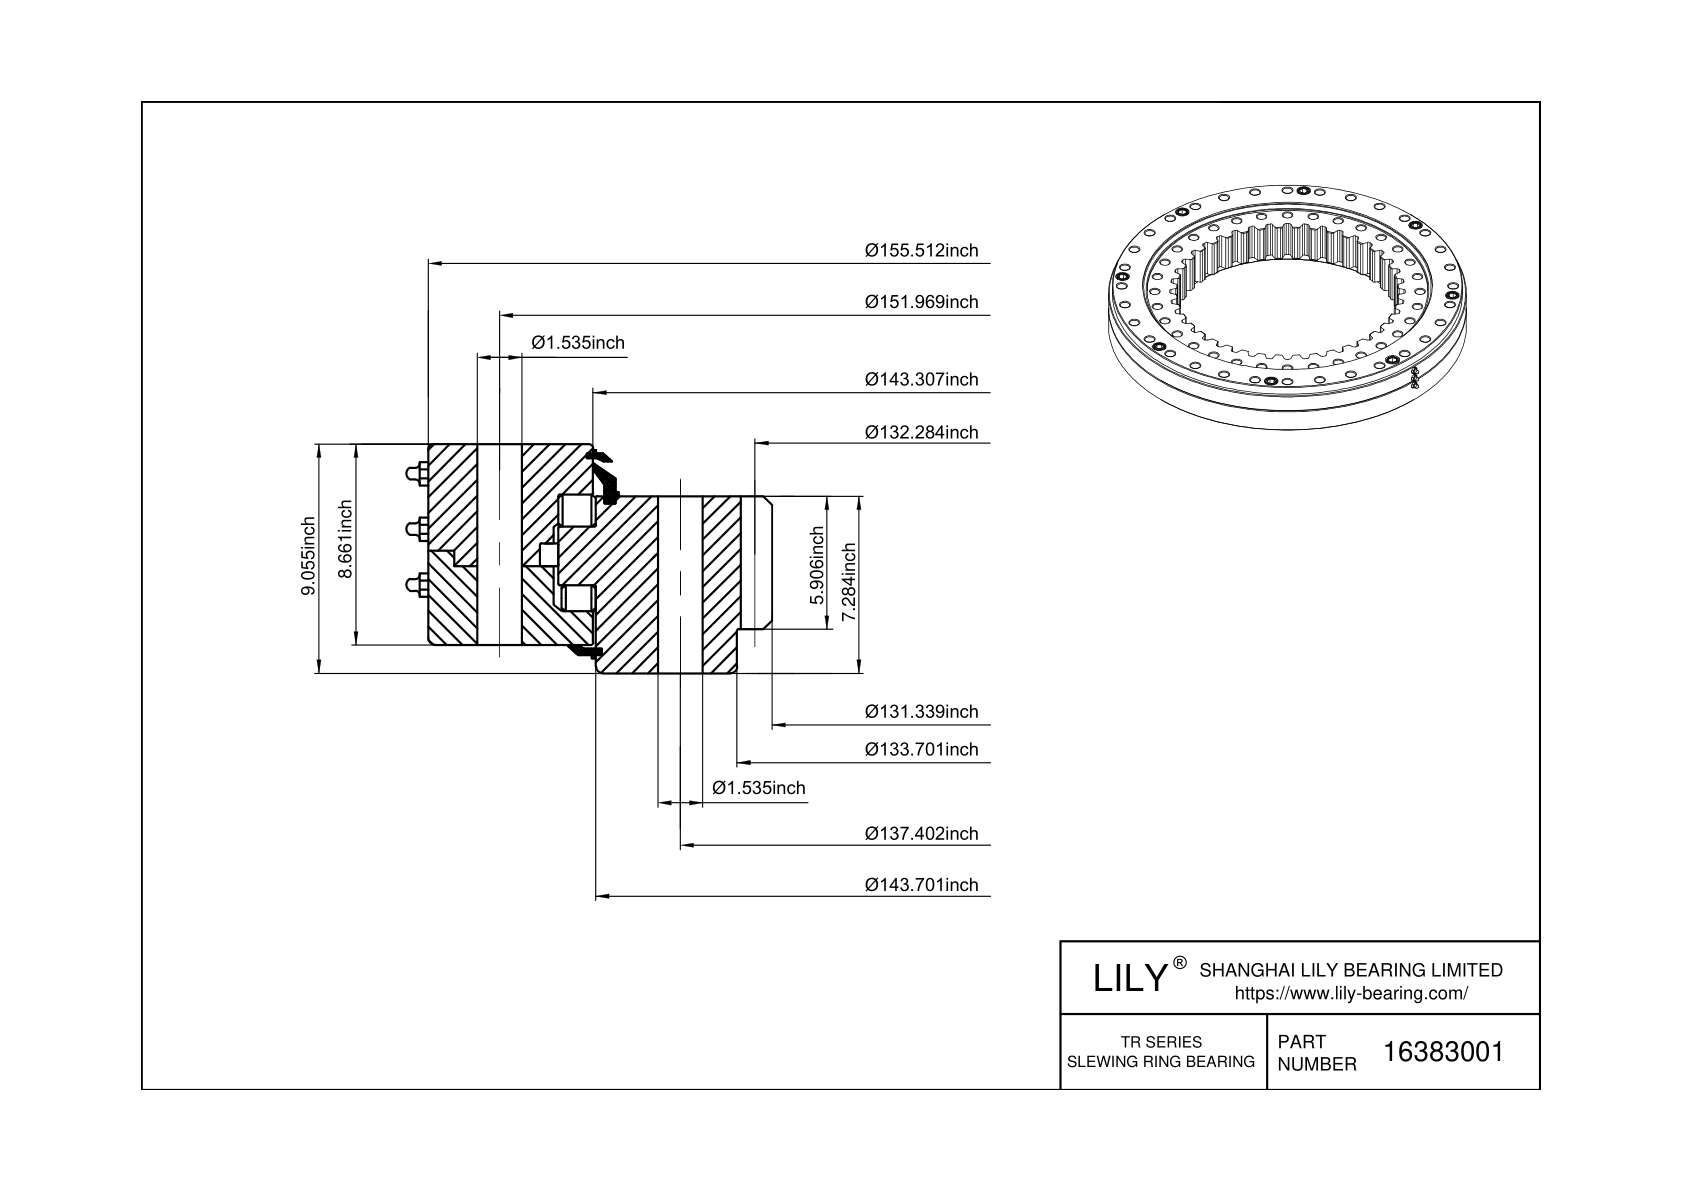 16383001 TR Series cad drawing